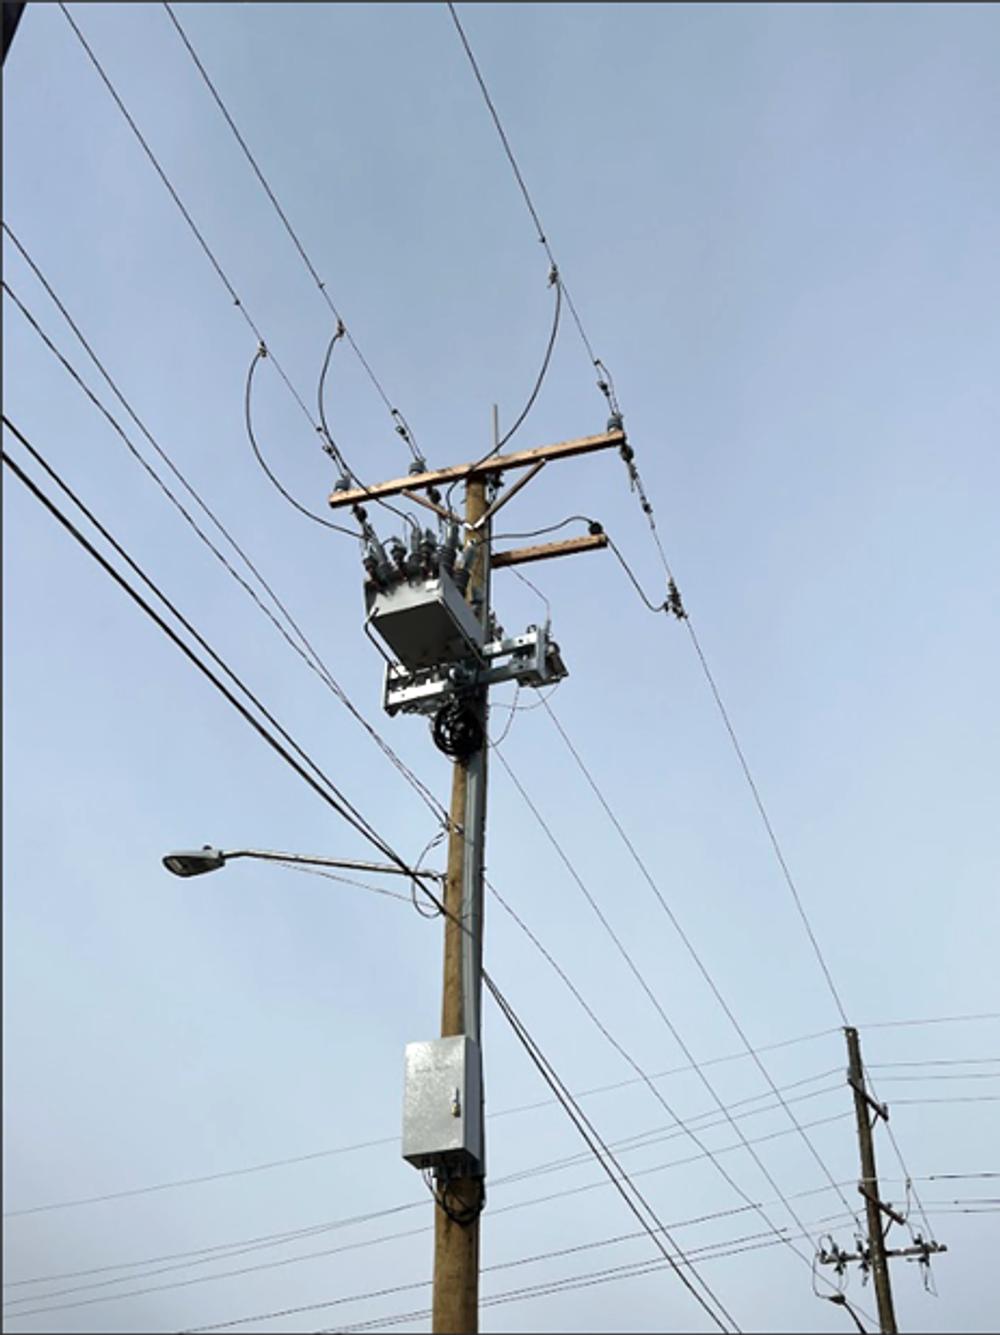 A NOJA Power OSM® Recloser installed in the ComEd Network, Illinois USA. Note the versatile mounting bracket which can be installed in both direct and side mount options, with an integrated Auxiliary voltage transformer bracket.